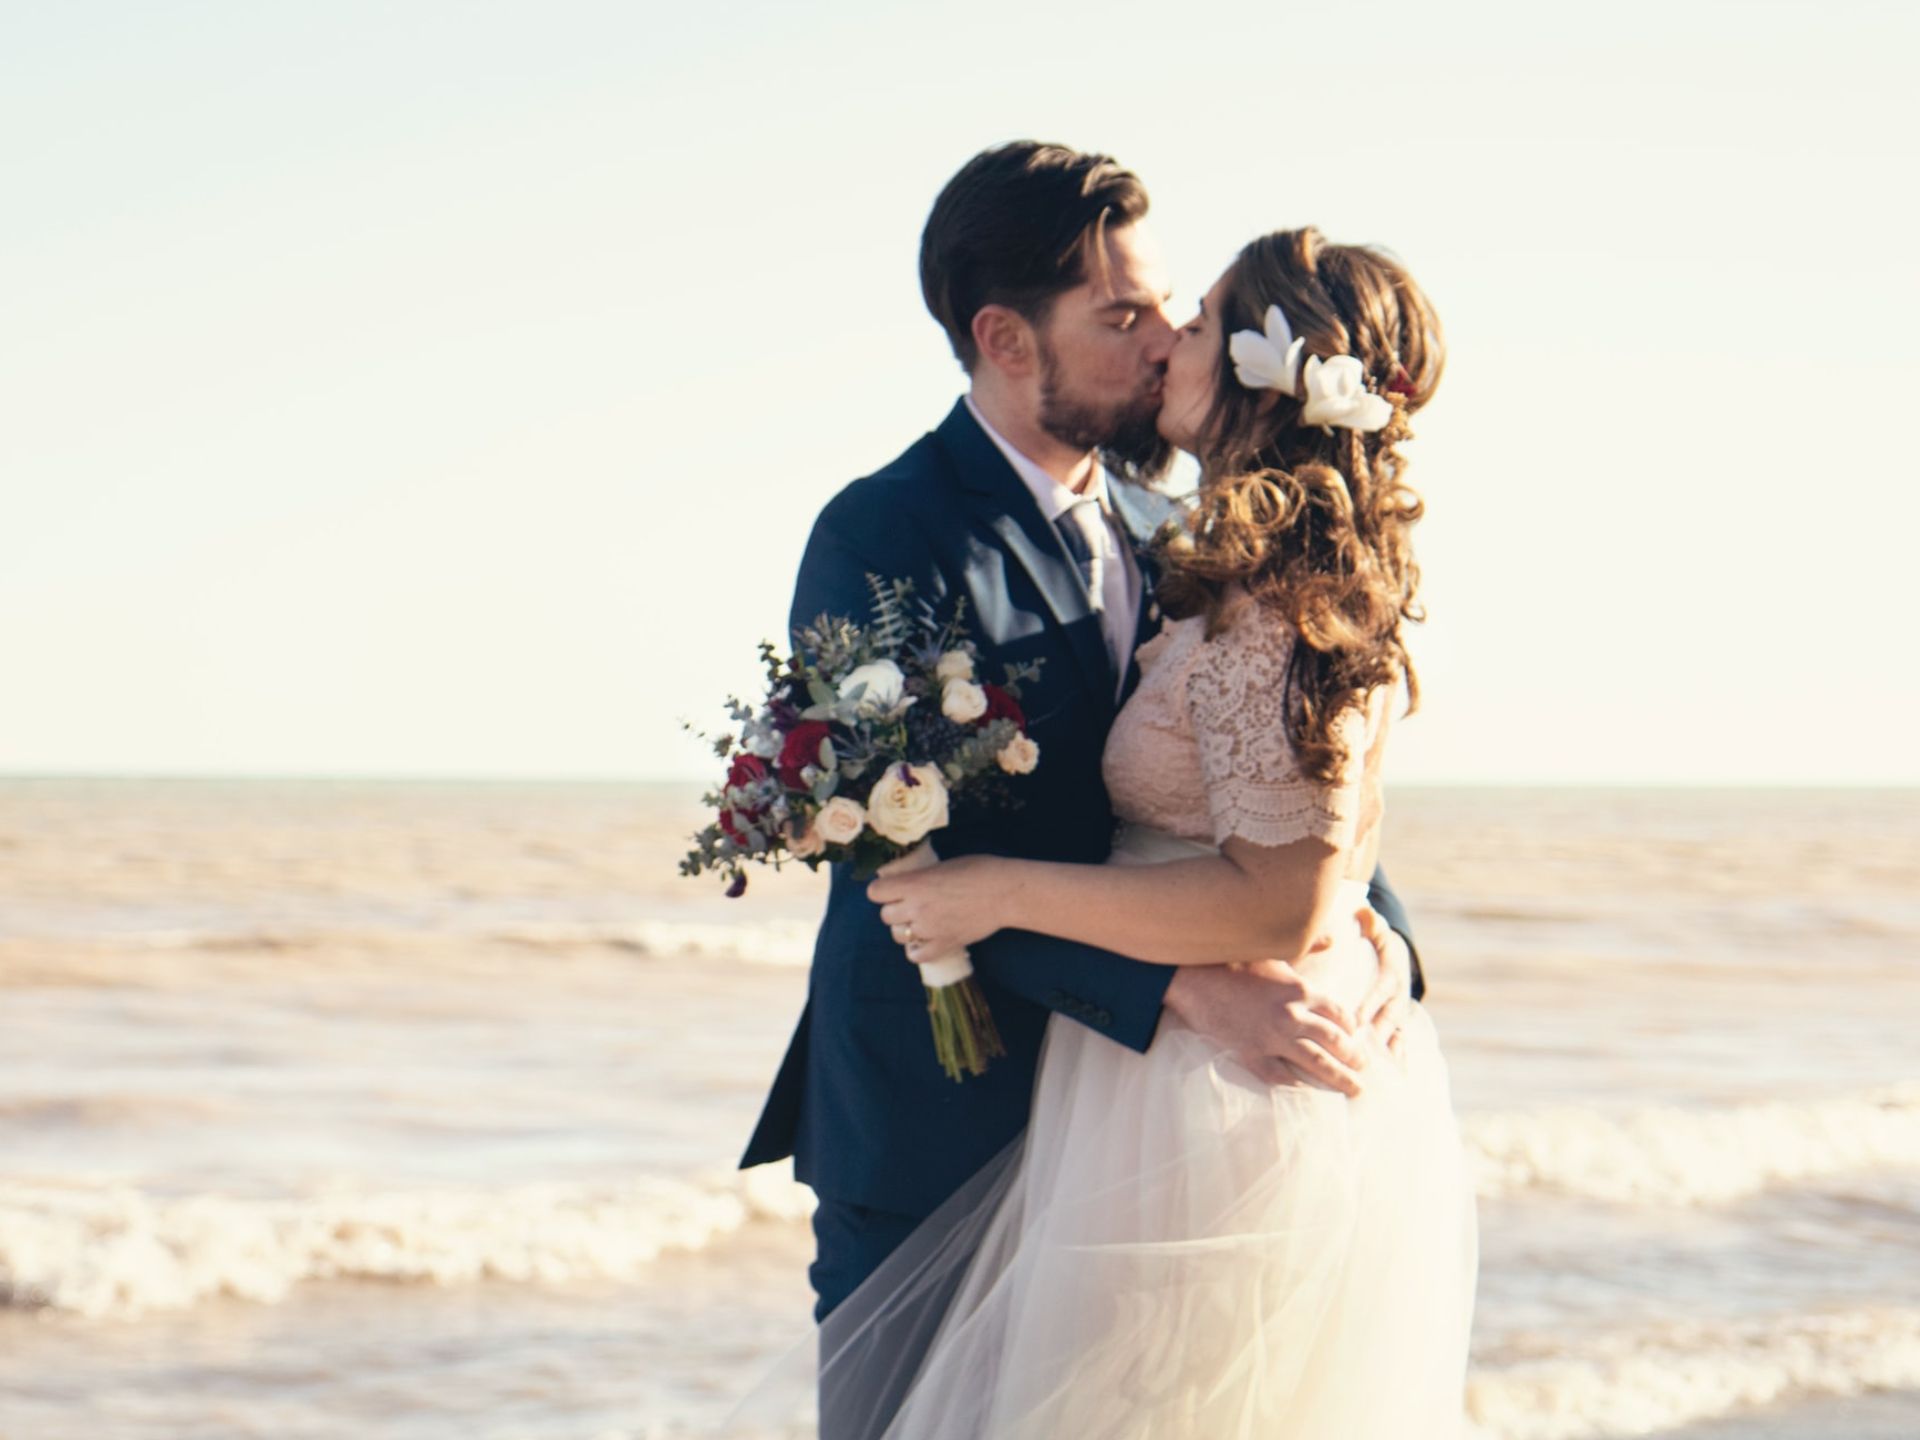 A bride and groom kissing at the beach.